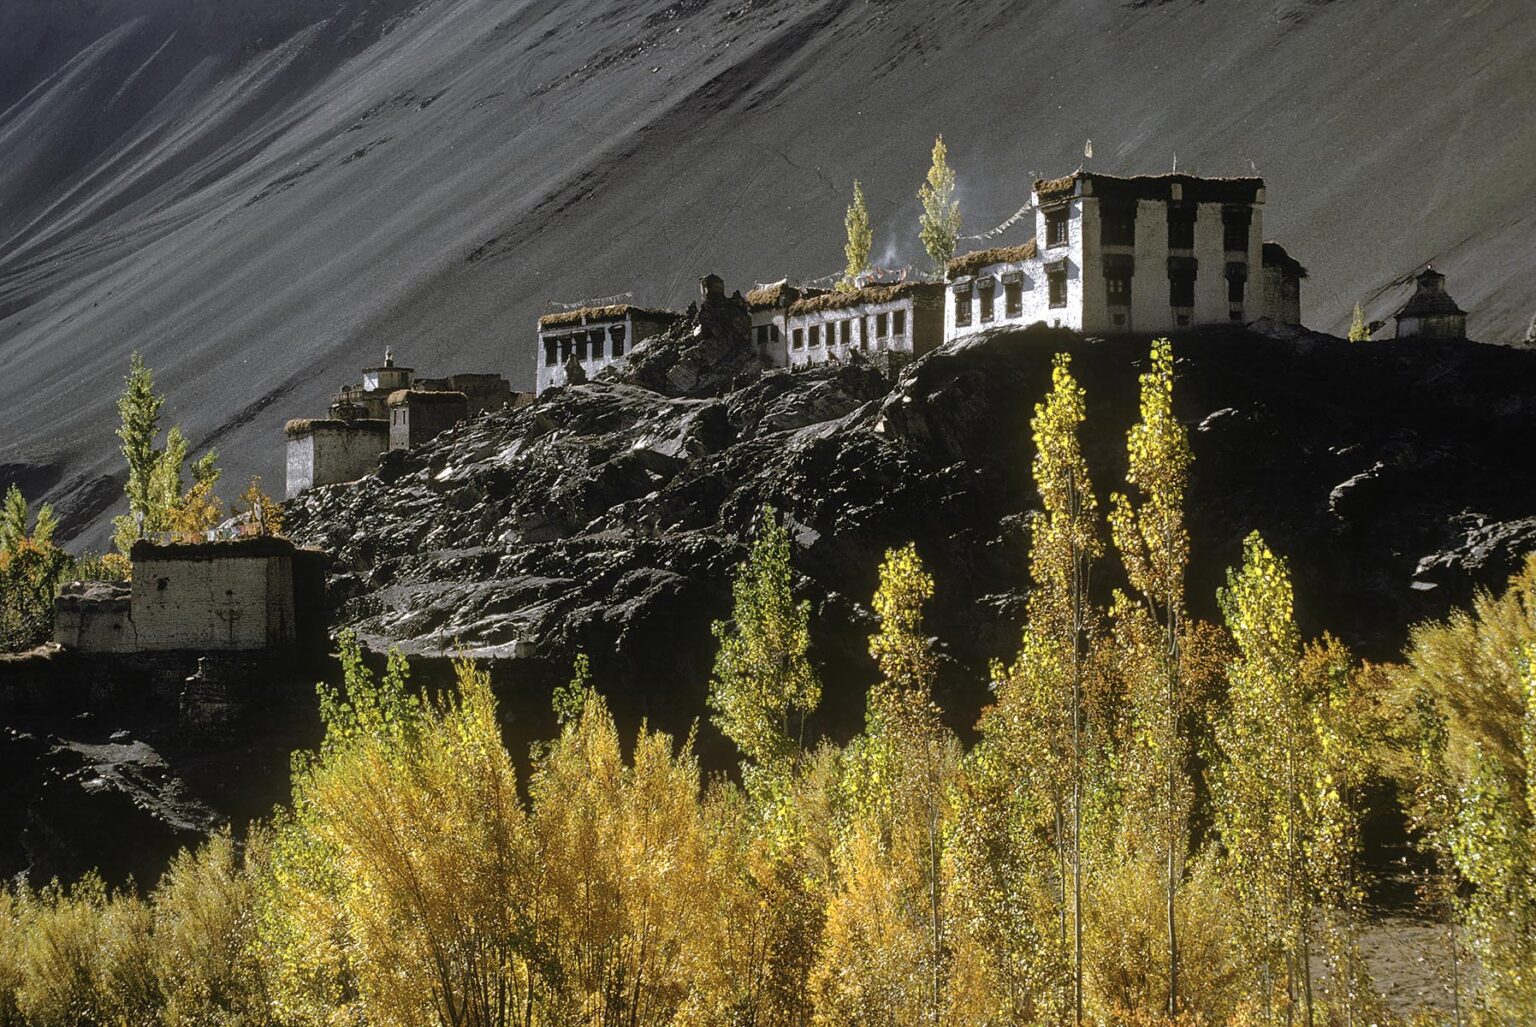 The village of ALCHI and the AUTUMN COLORS of its trees stand out against the barren Himalayan hills - LADAKH, INDIA